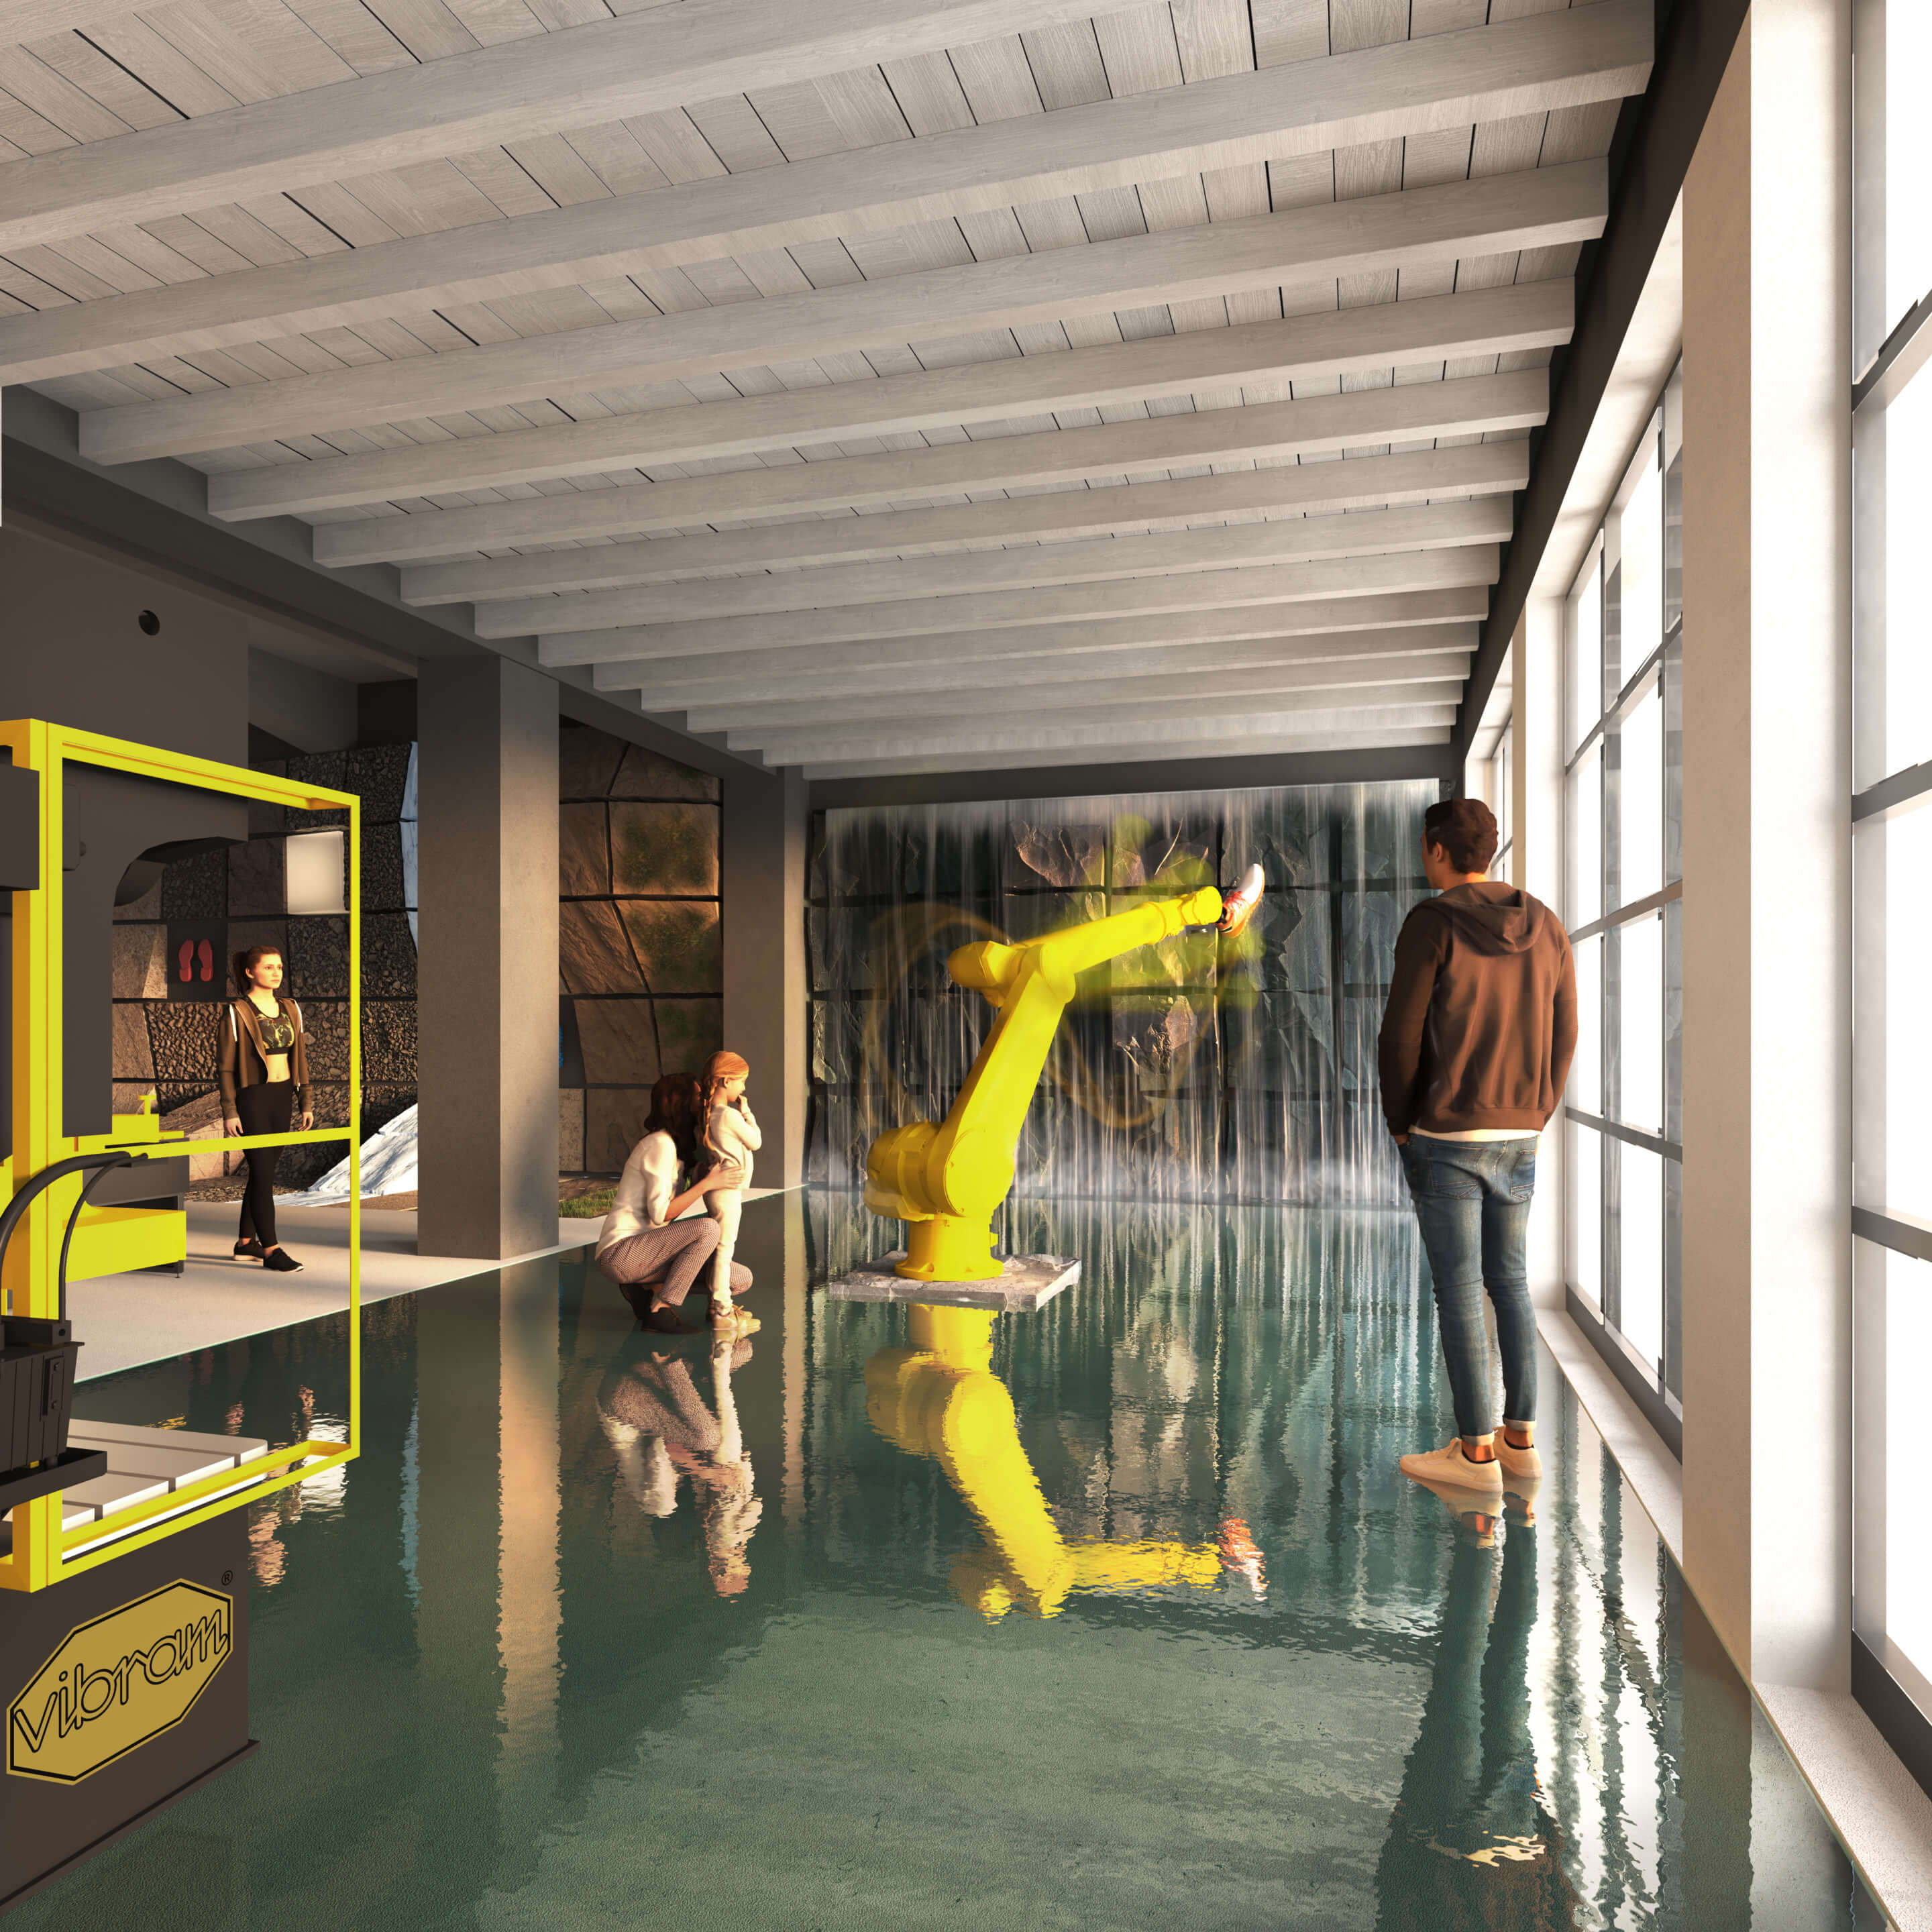 rendering of a footwear testing facility with a yellow robotic arm